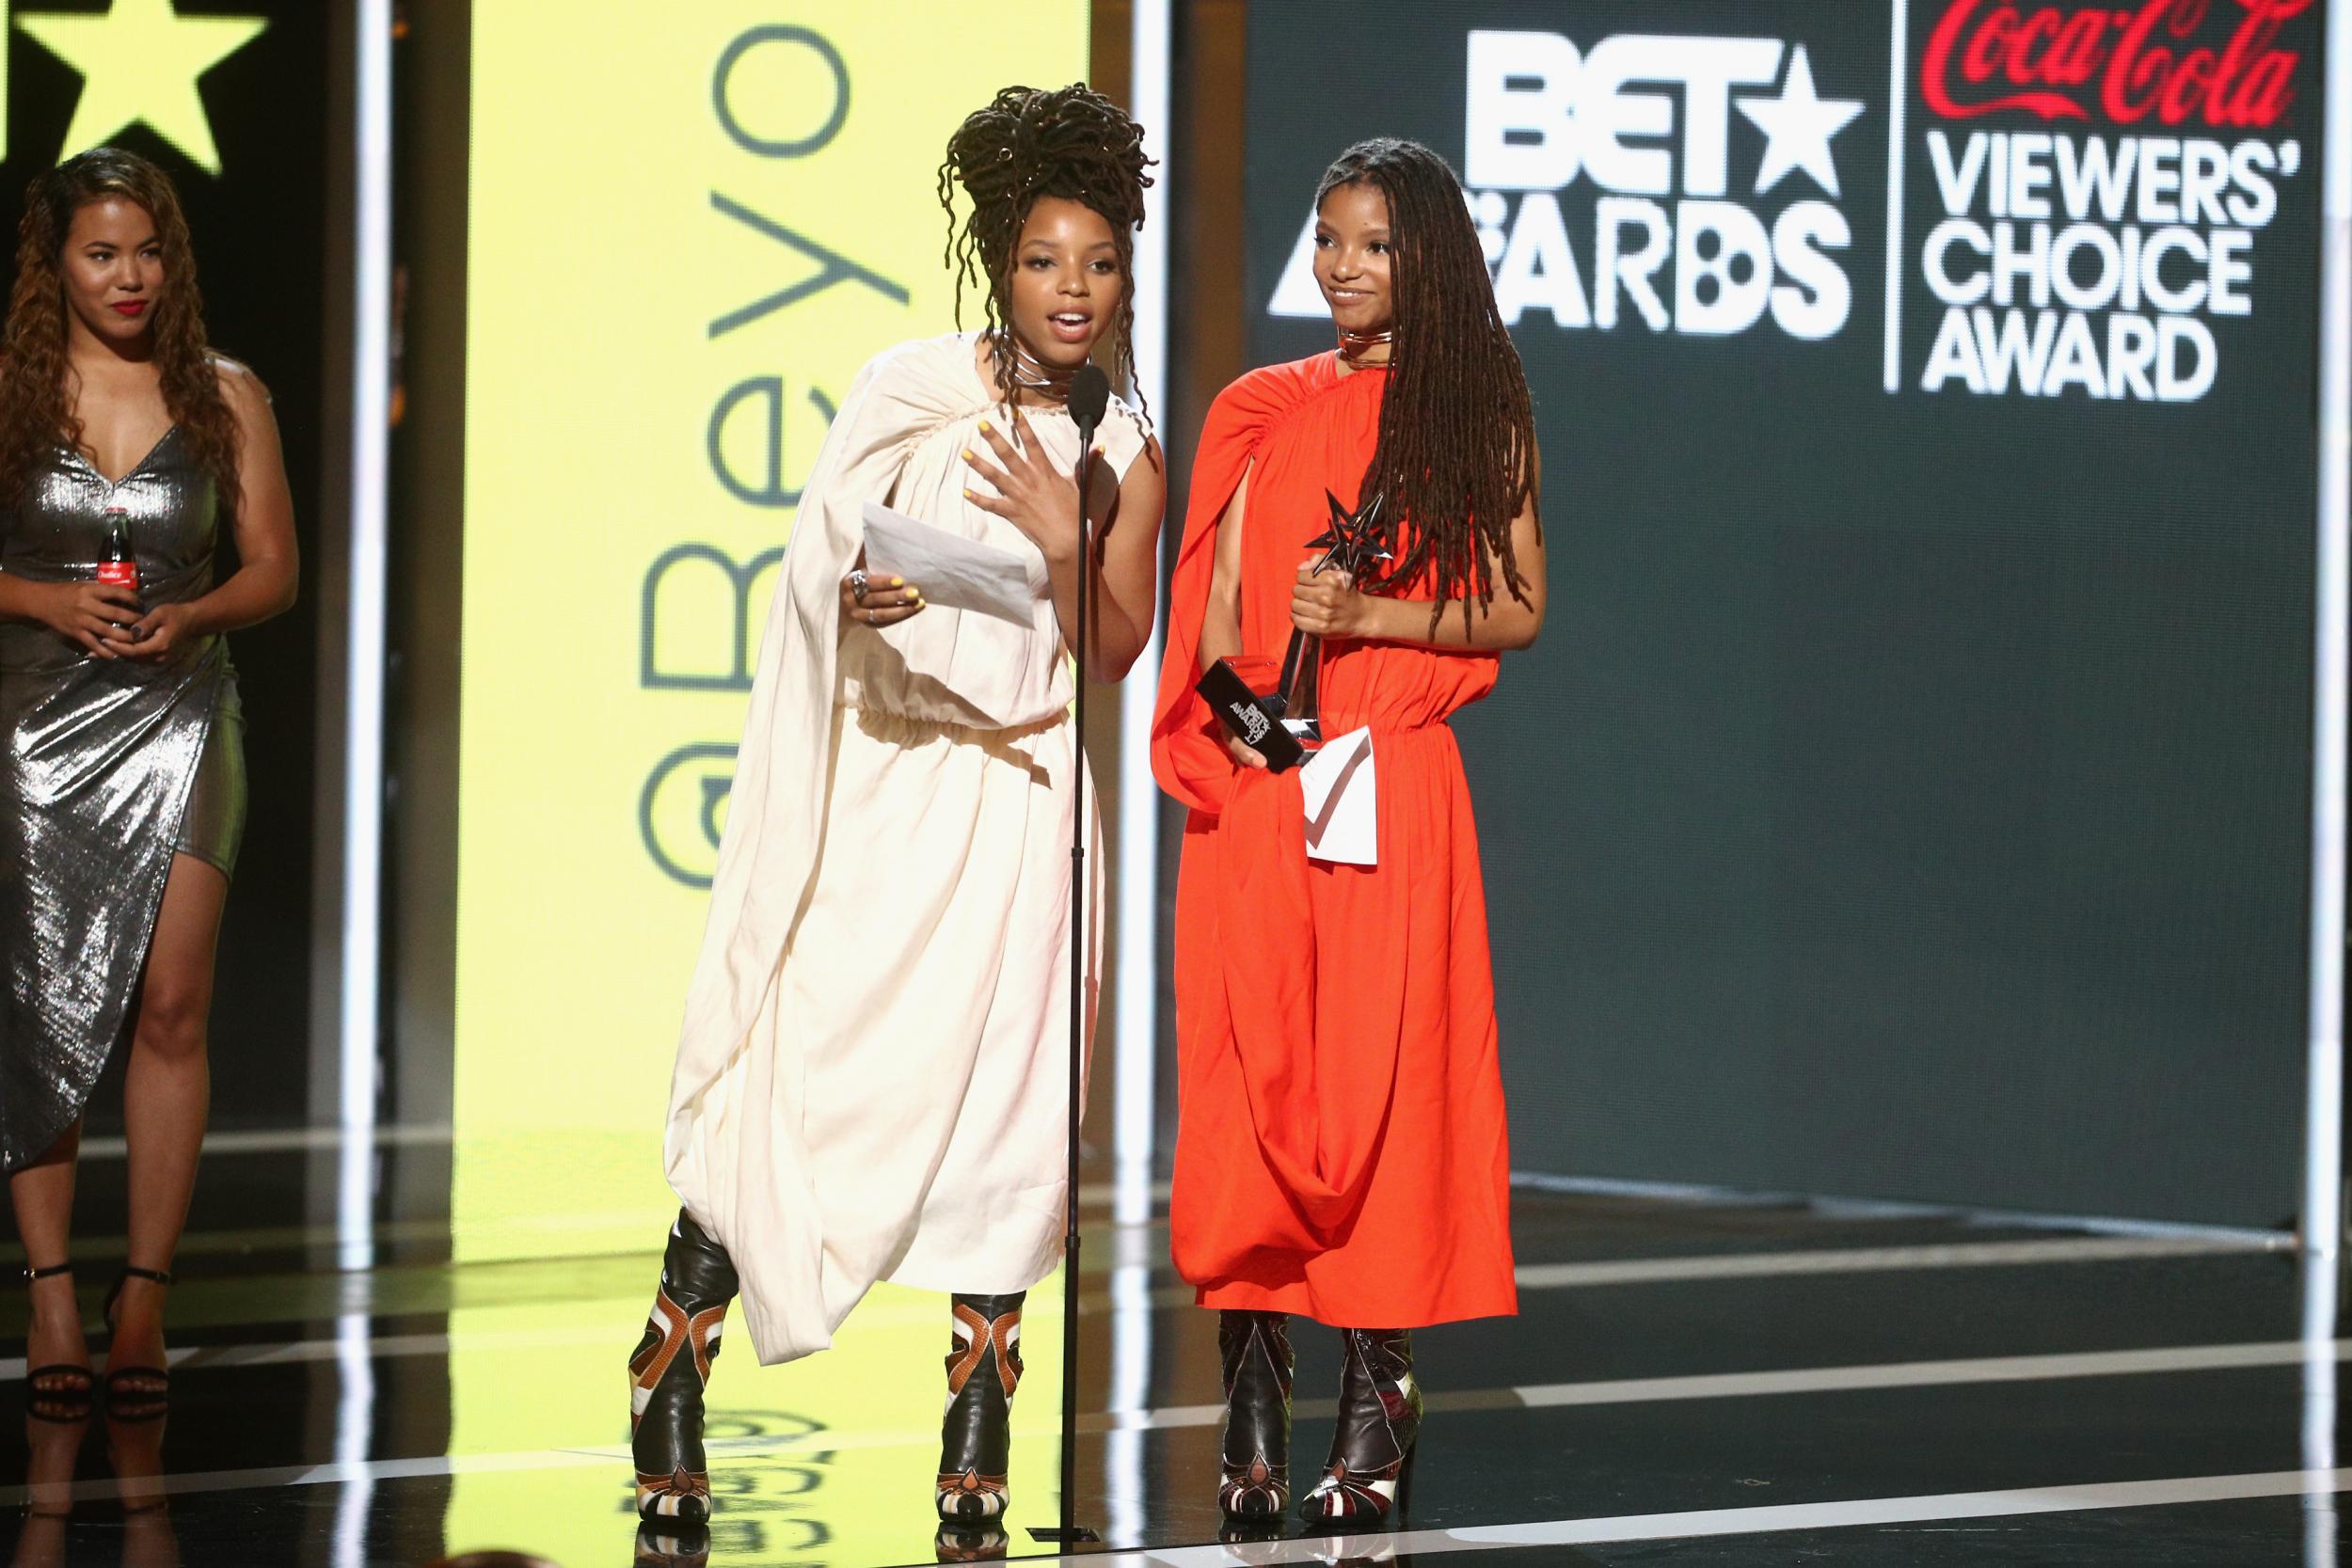 Here's everything you need to know about this year's BET Awards.